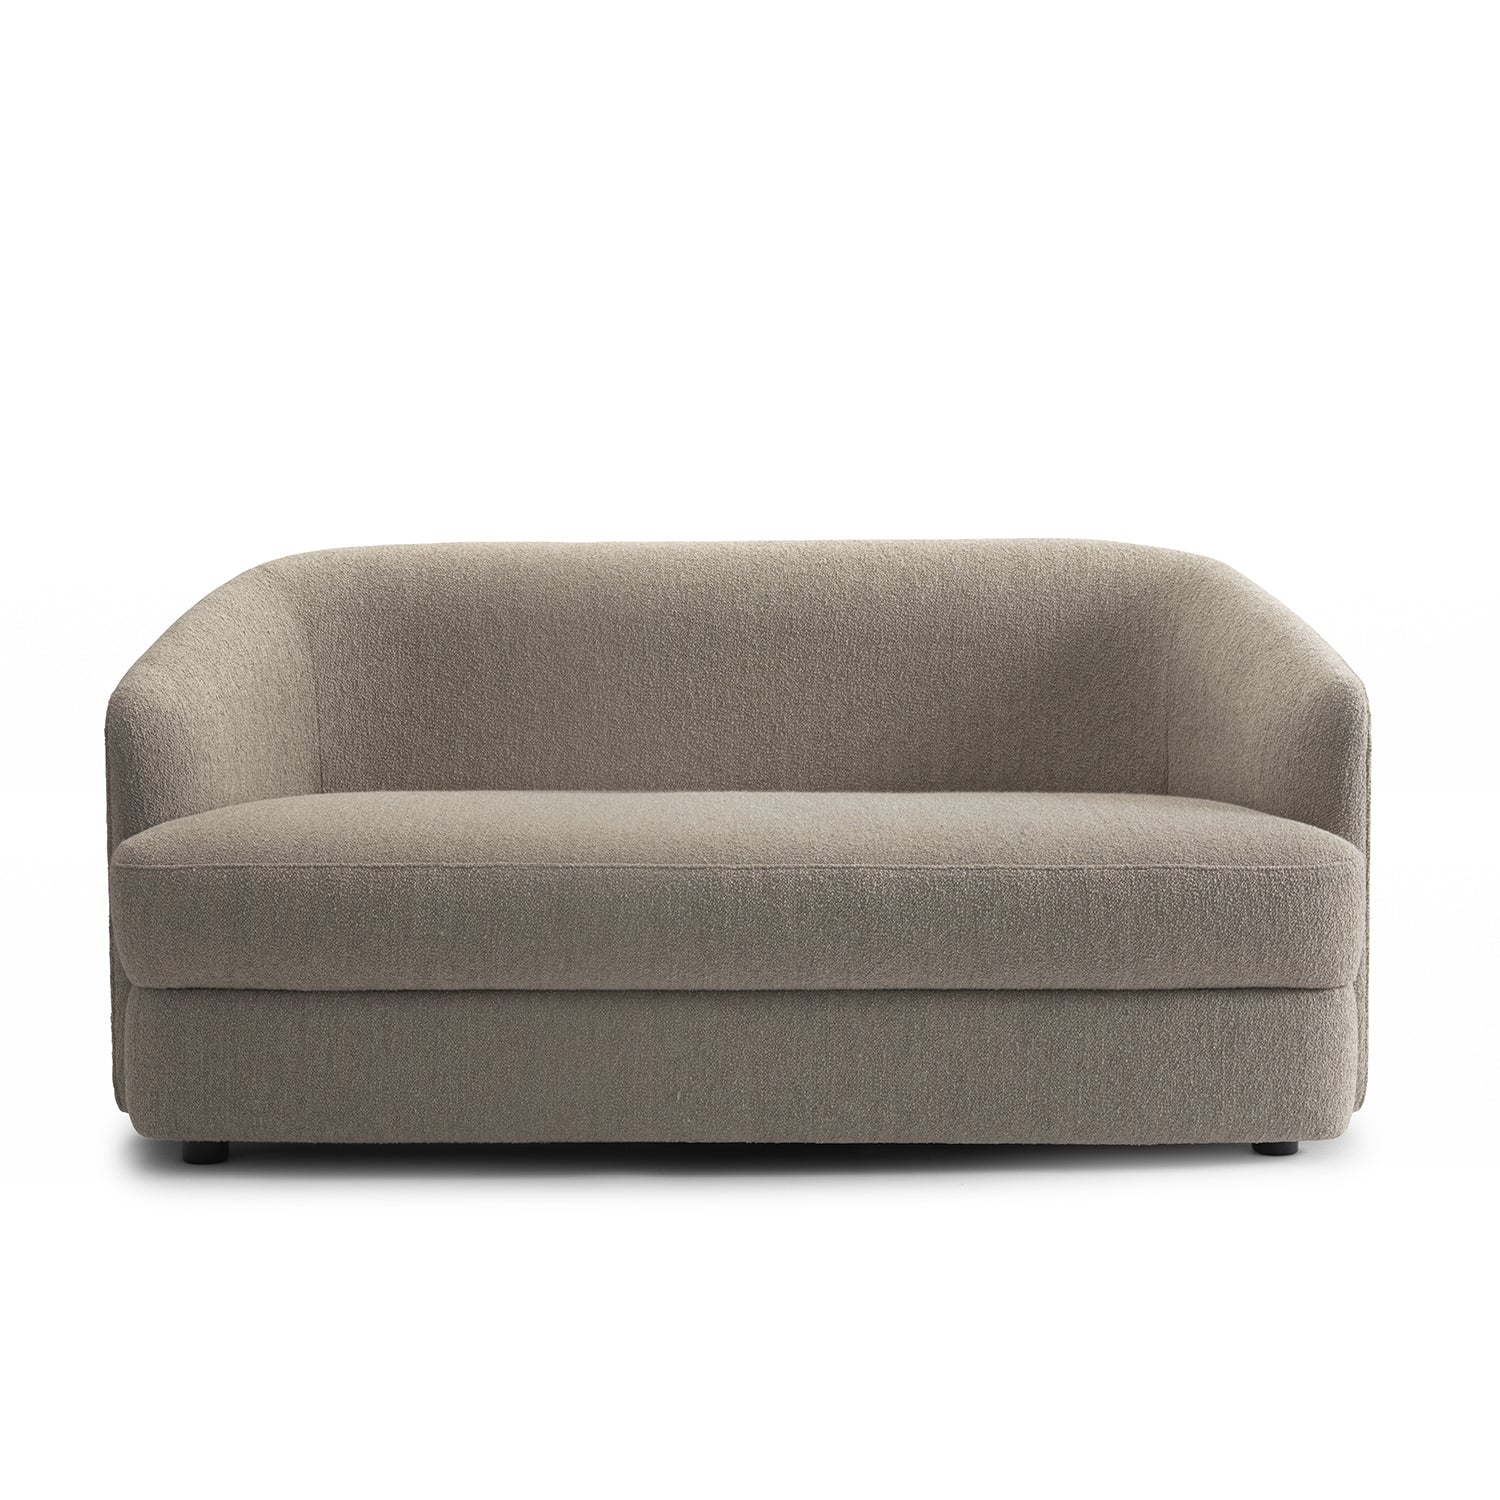 Covent 2 Seater Sofa - The Design Choice